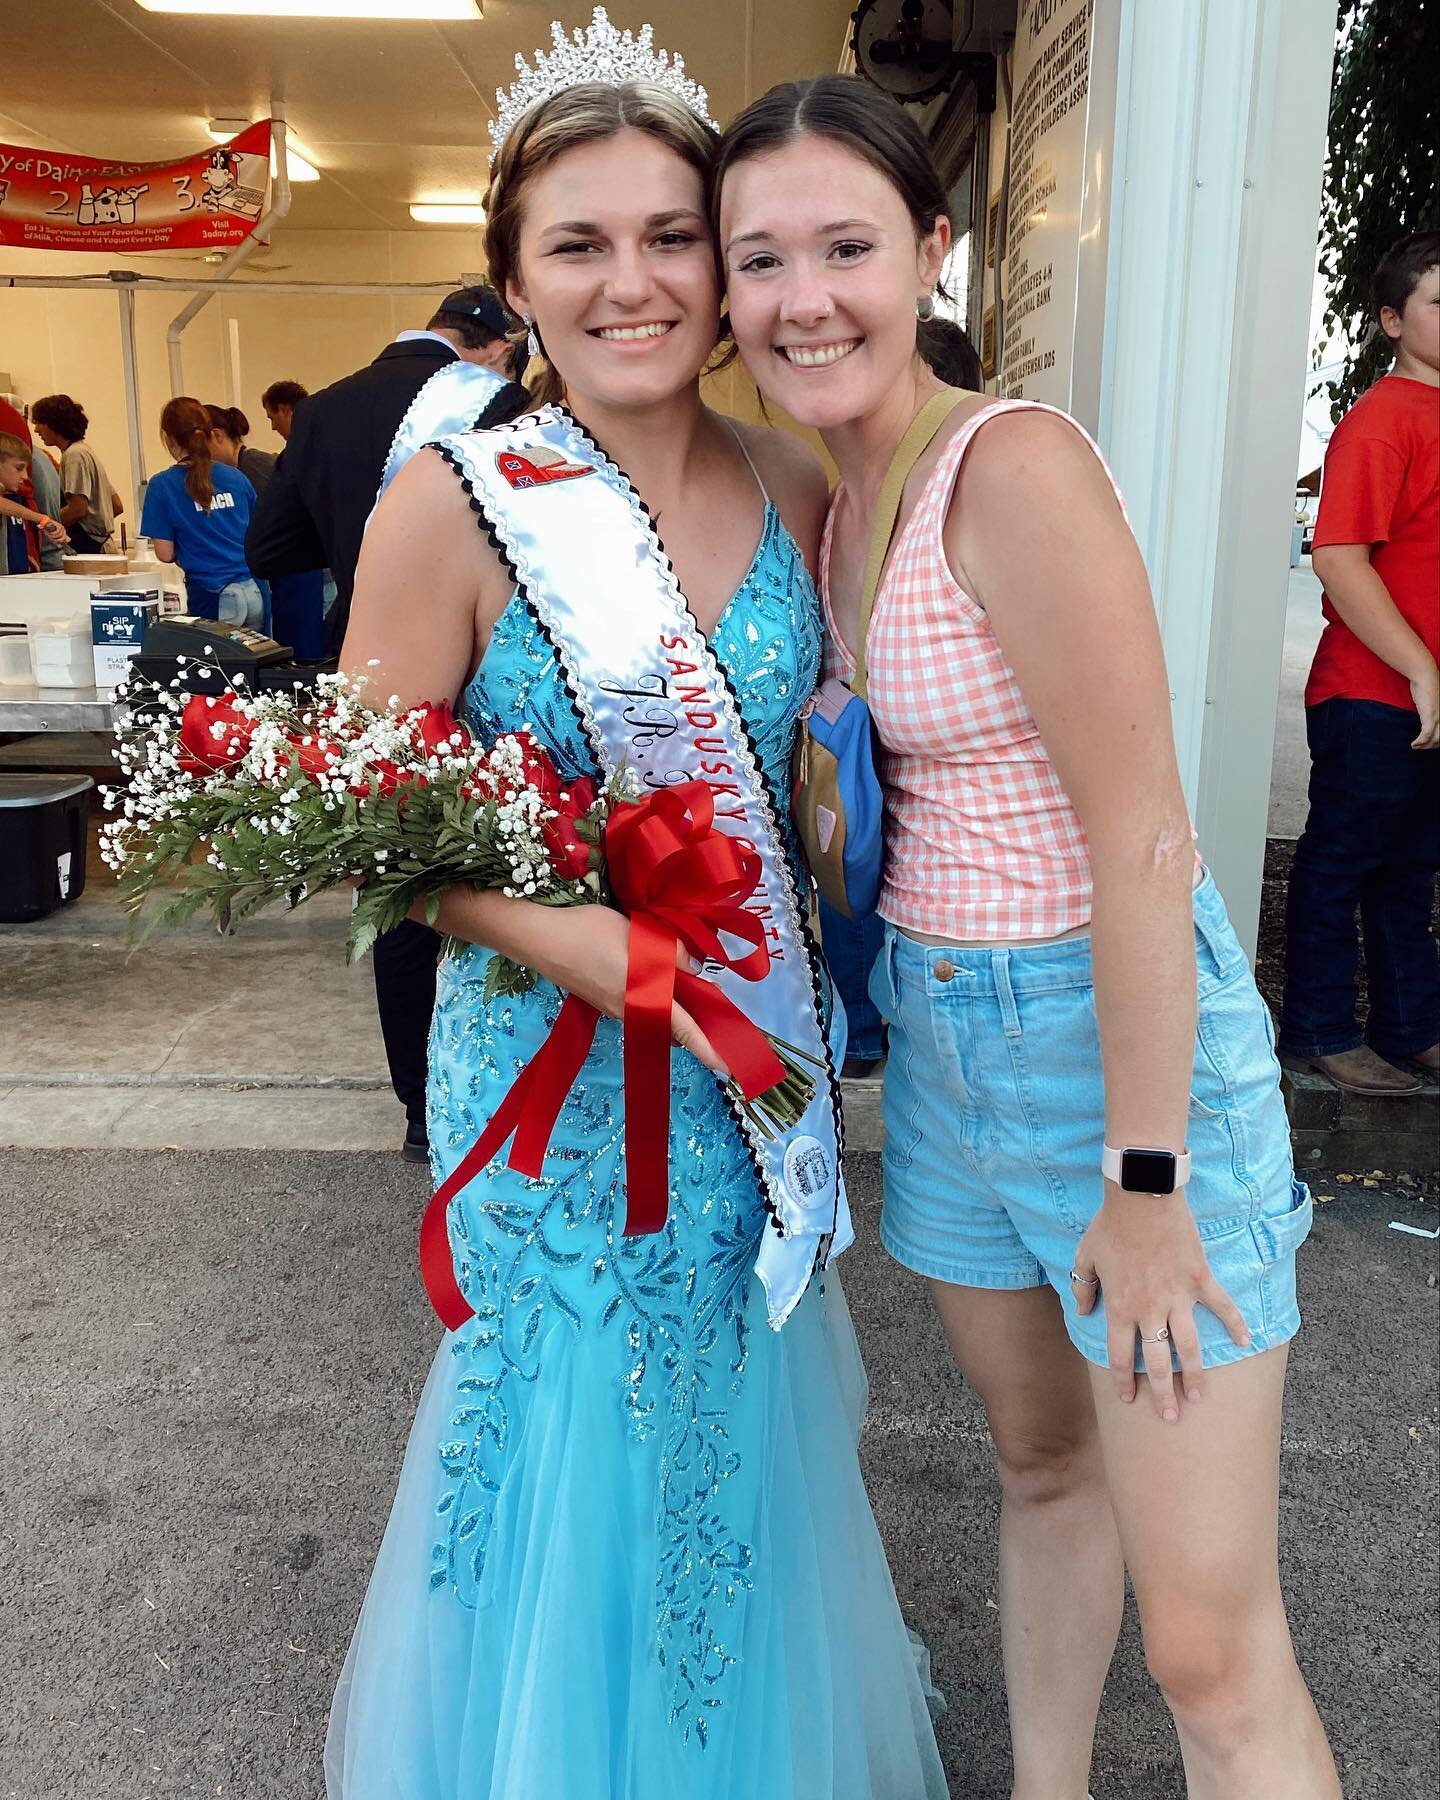 Congratulations to our company dancer Grace, the 2022 Sandusky County Fair Queen, and congratulations to our dancer Camden, the 2022 Sandusky County Horse Princess! We love seeing our dancers excel in their activities!! 😍